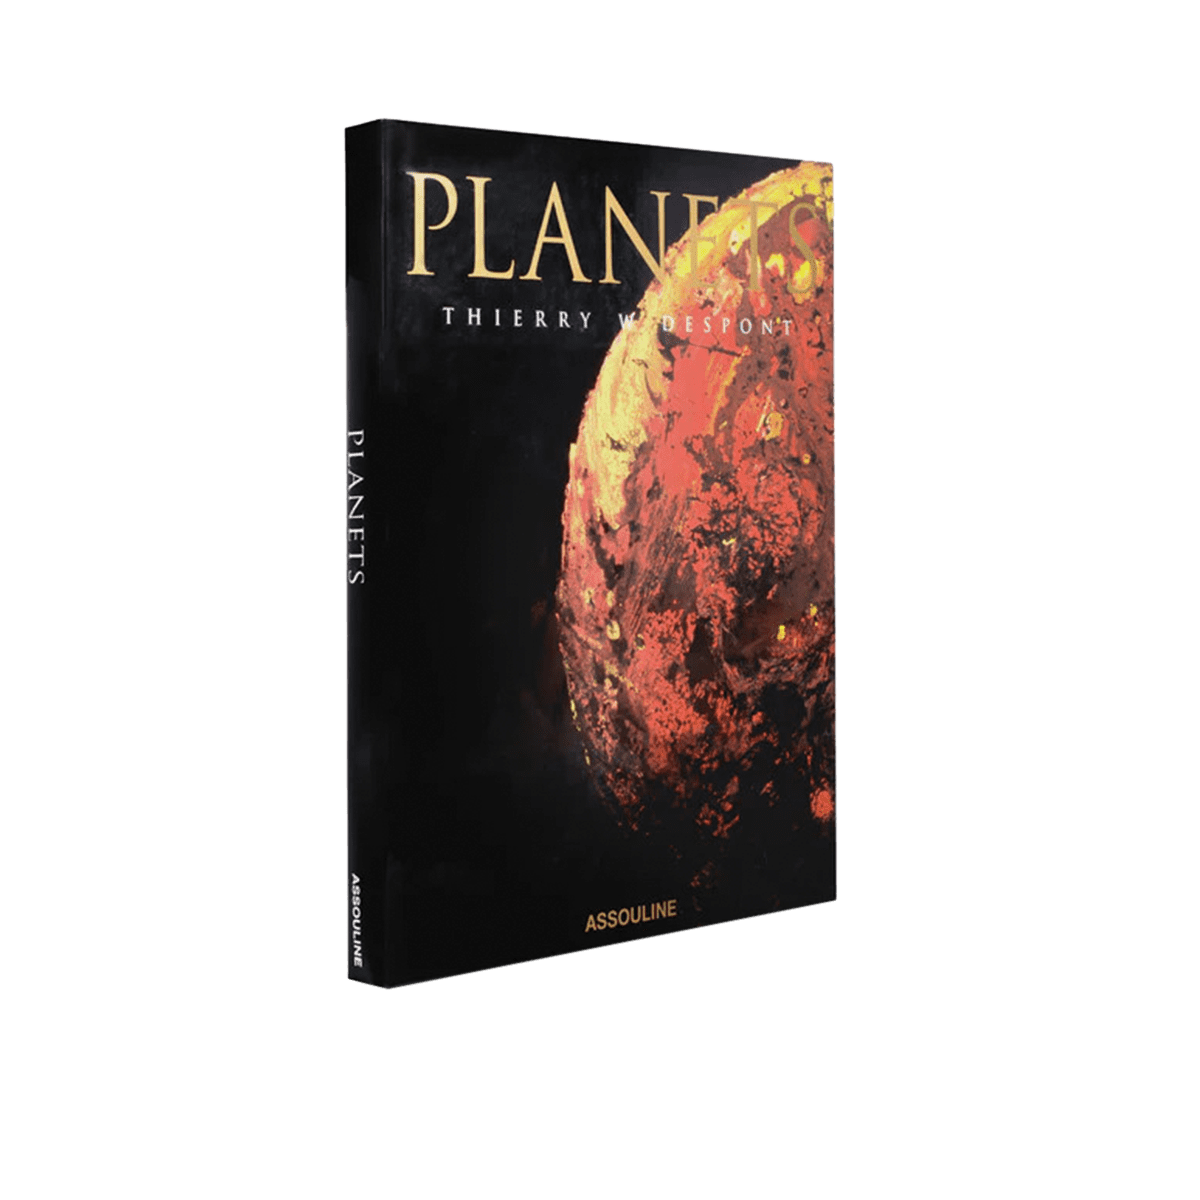 Planets Coffee Table Book